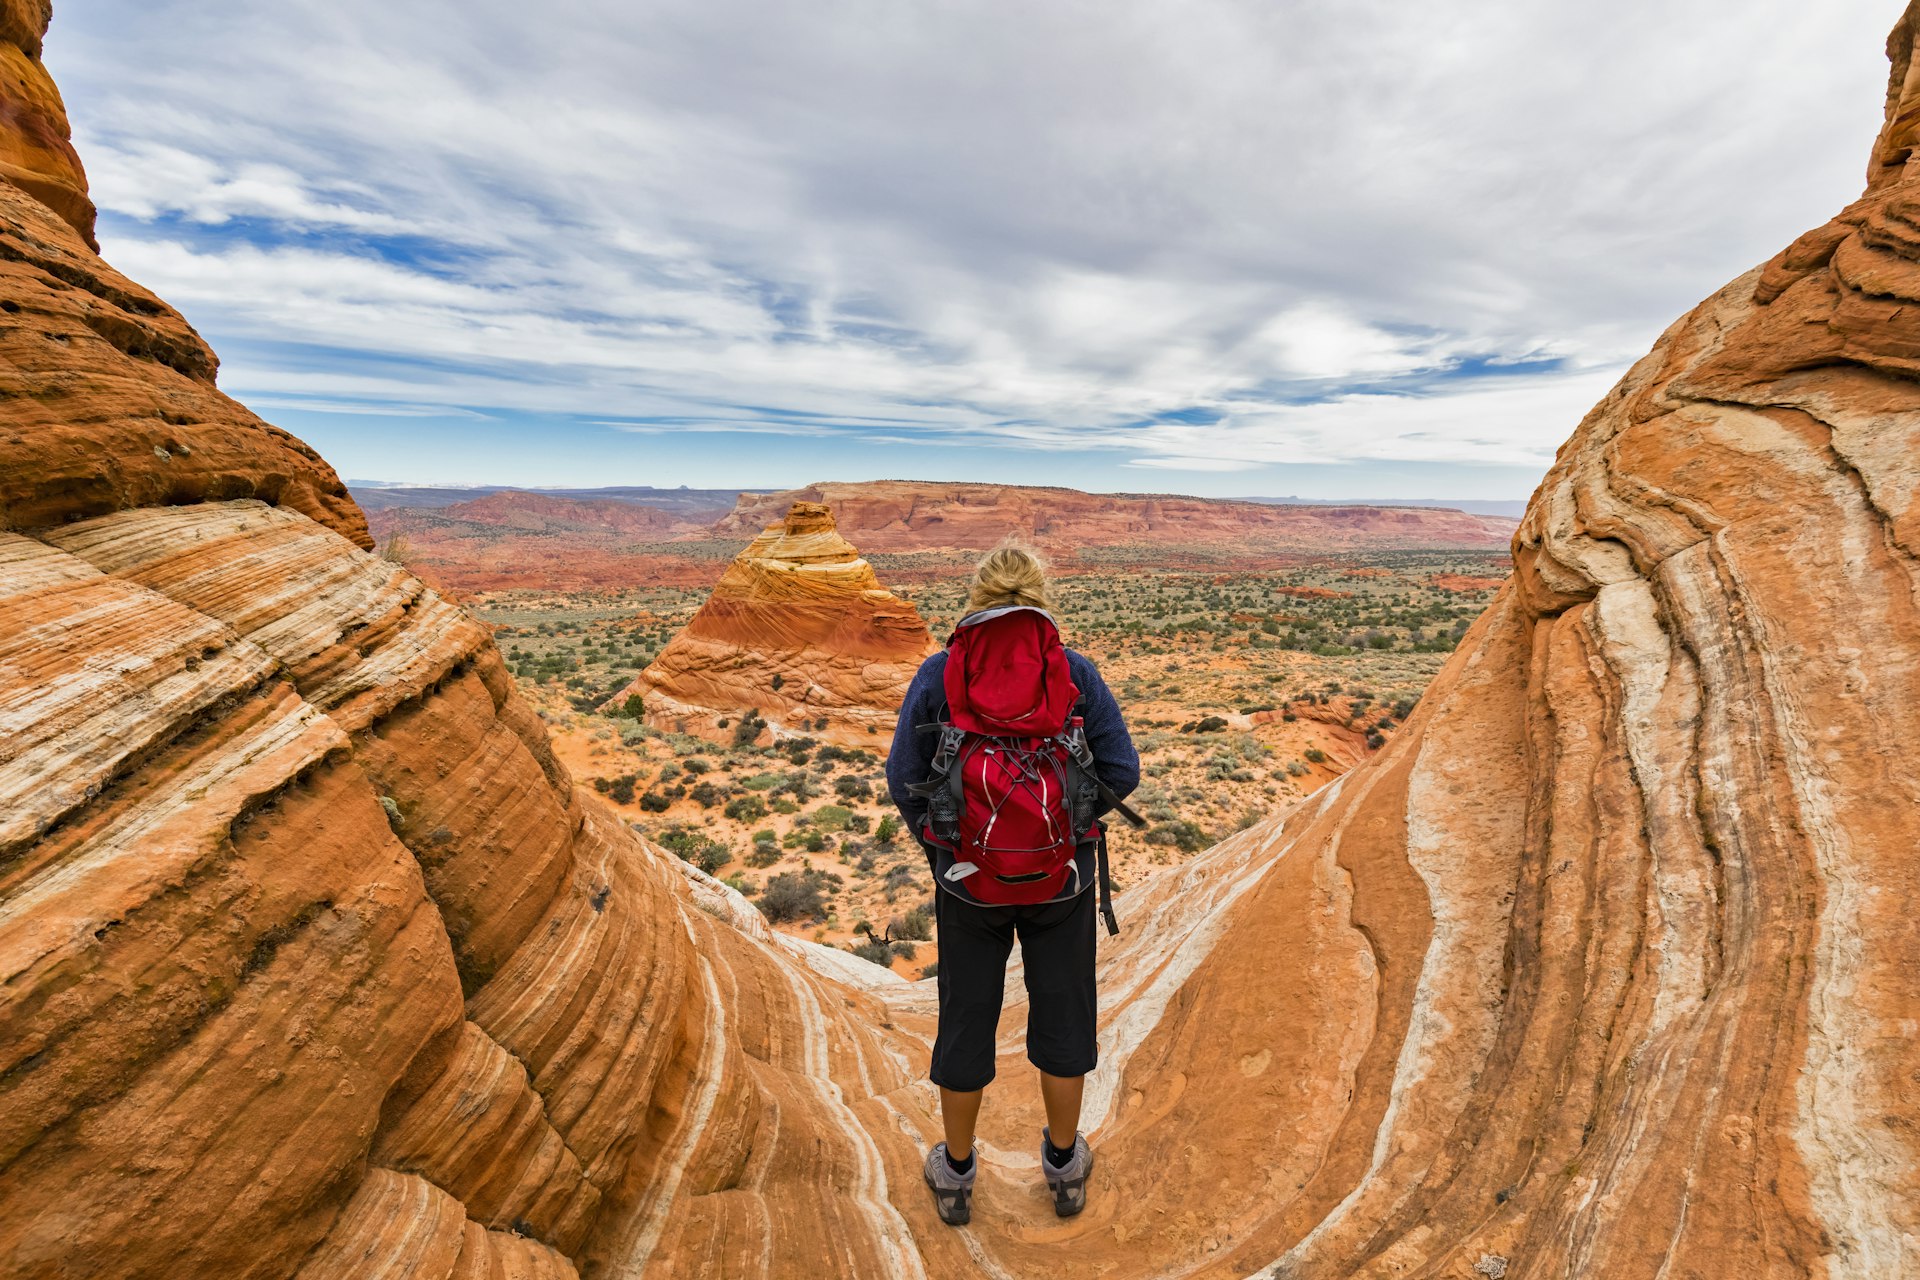 A hiker looks out to a desert landscape where the rocks are striped in orange, pink and sandstone colors